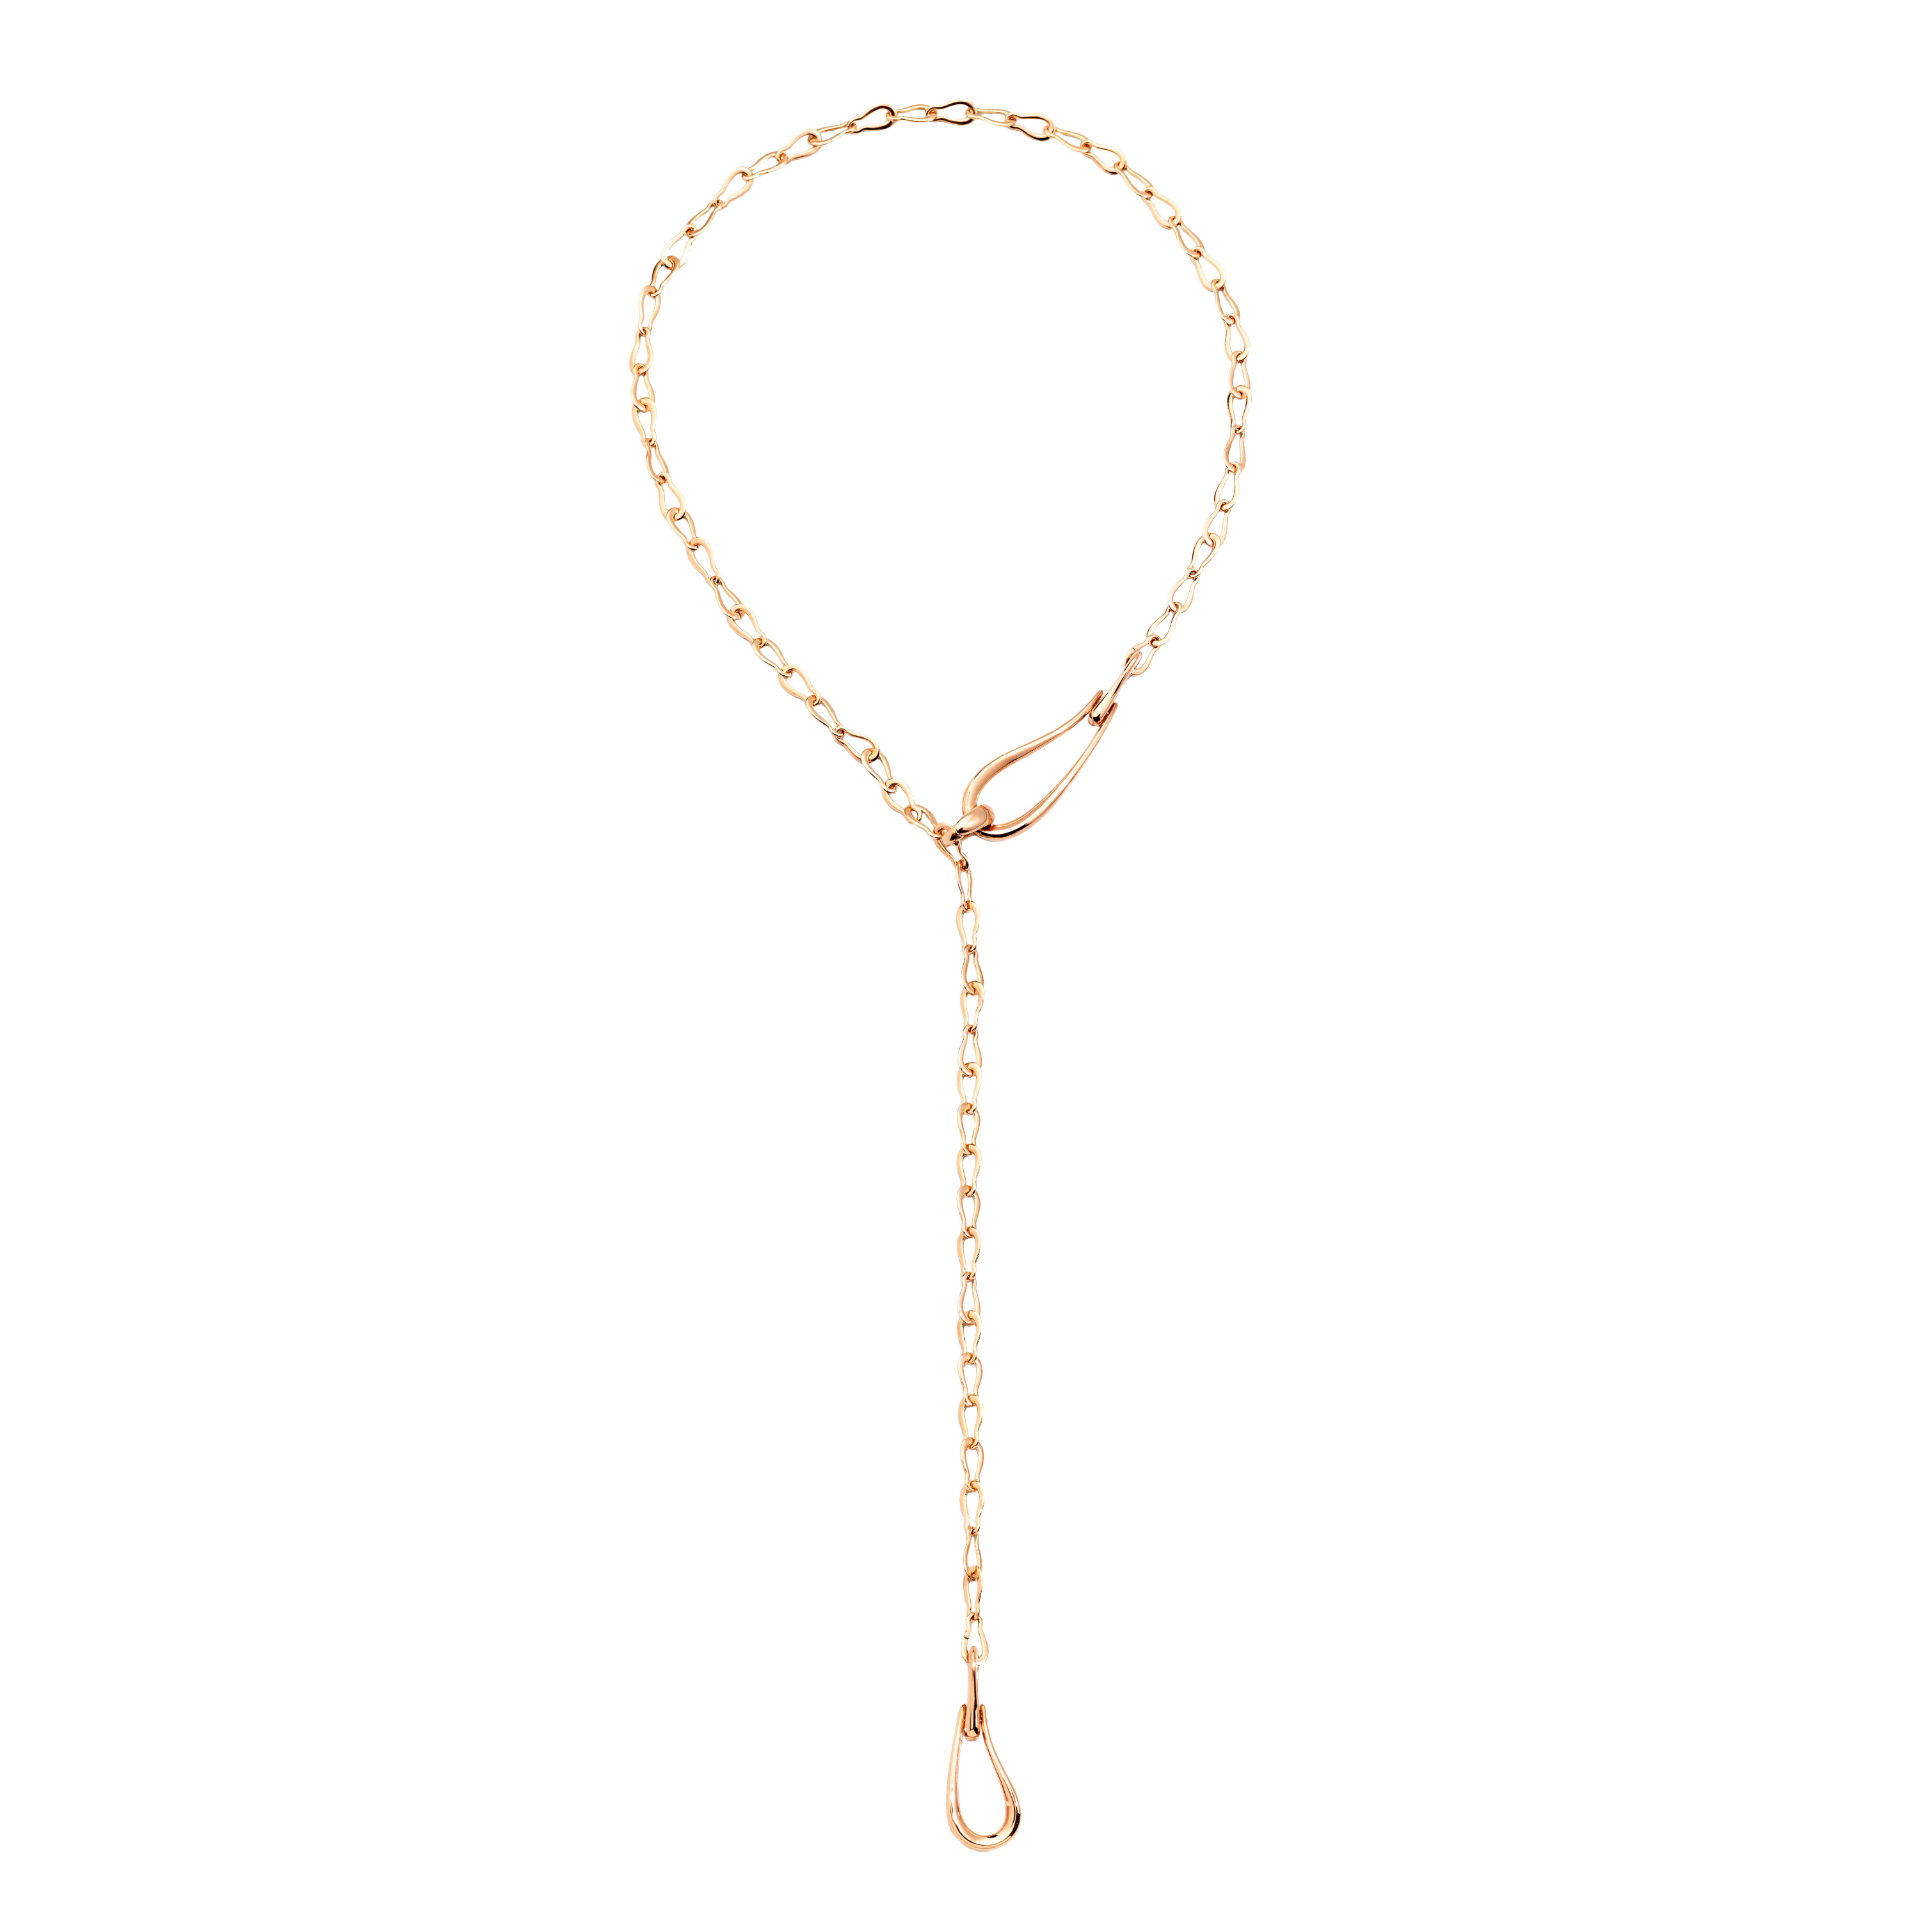 Pomellato - Catene Gourmette Link Chain Necklace, 18k Rose Gold – AF  Jewelers